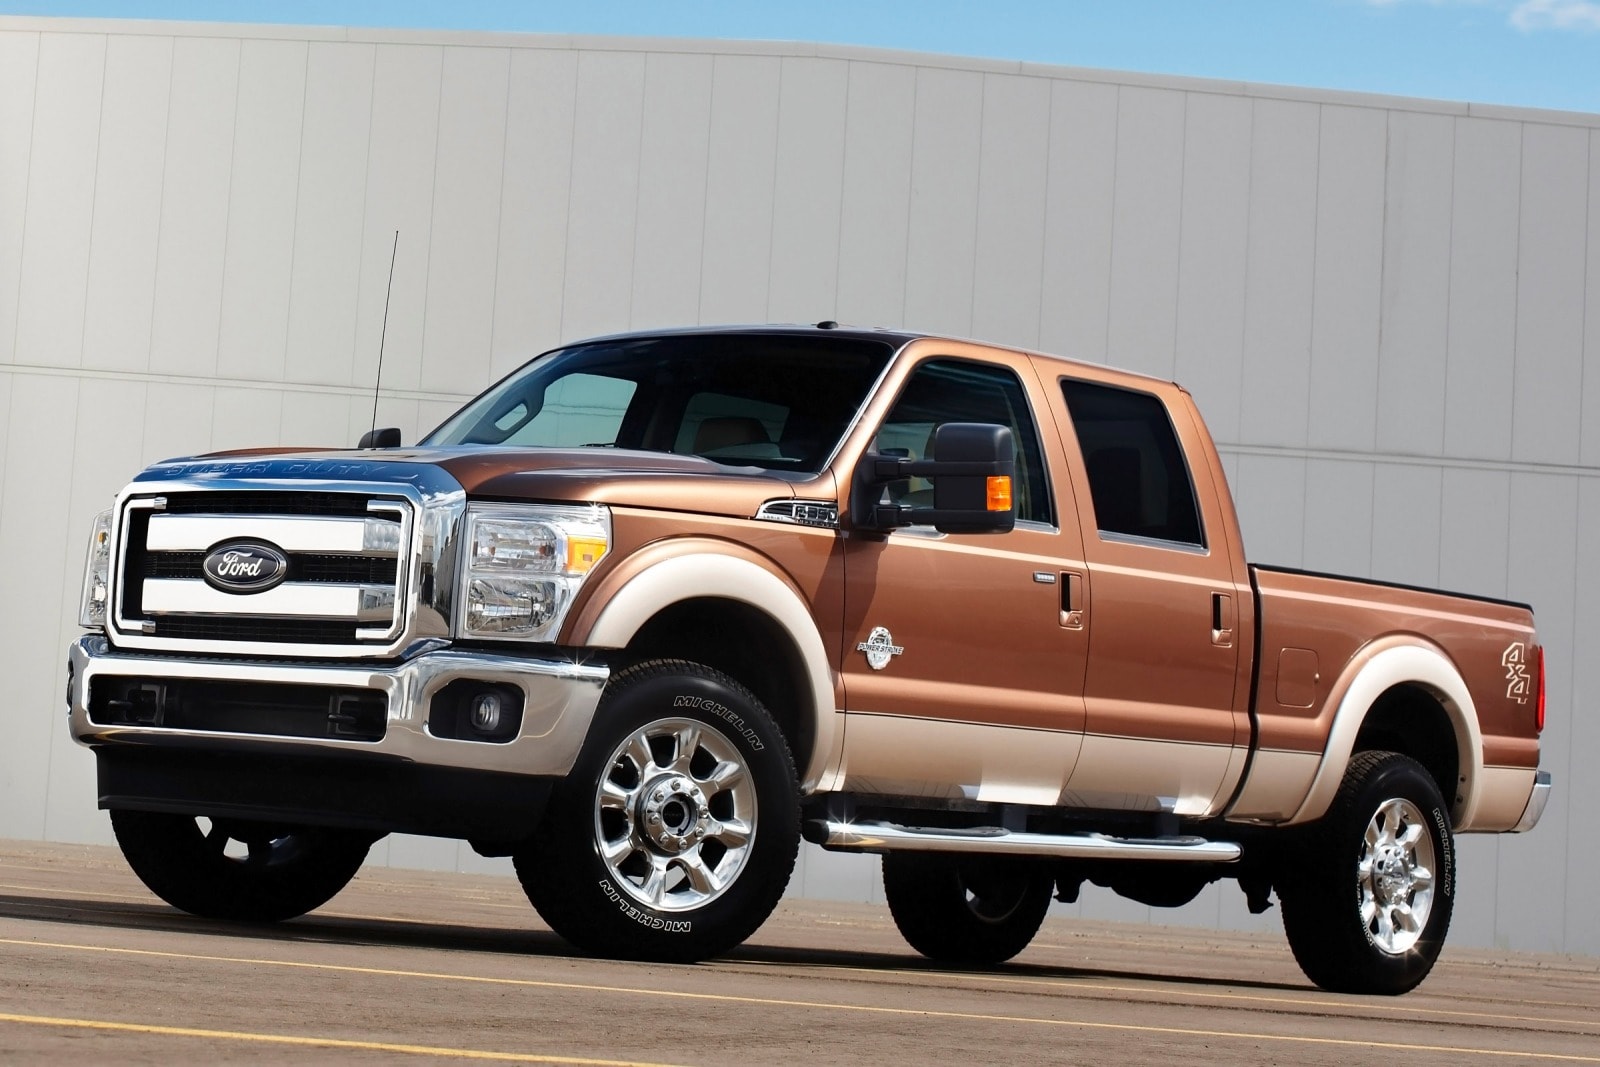 Unveiling the Flaws: Problems & Complaints of the 2016 Ford F250 Super Duty